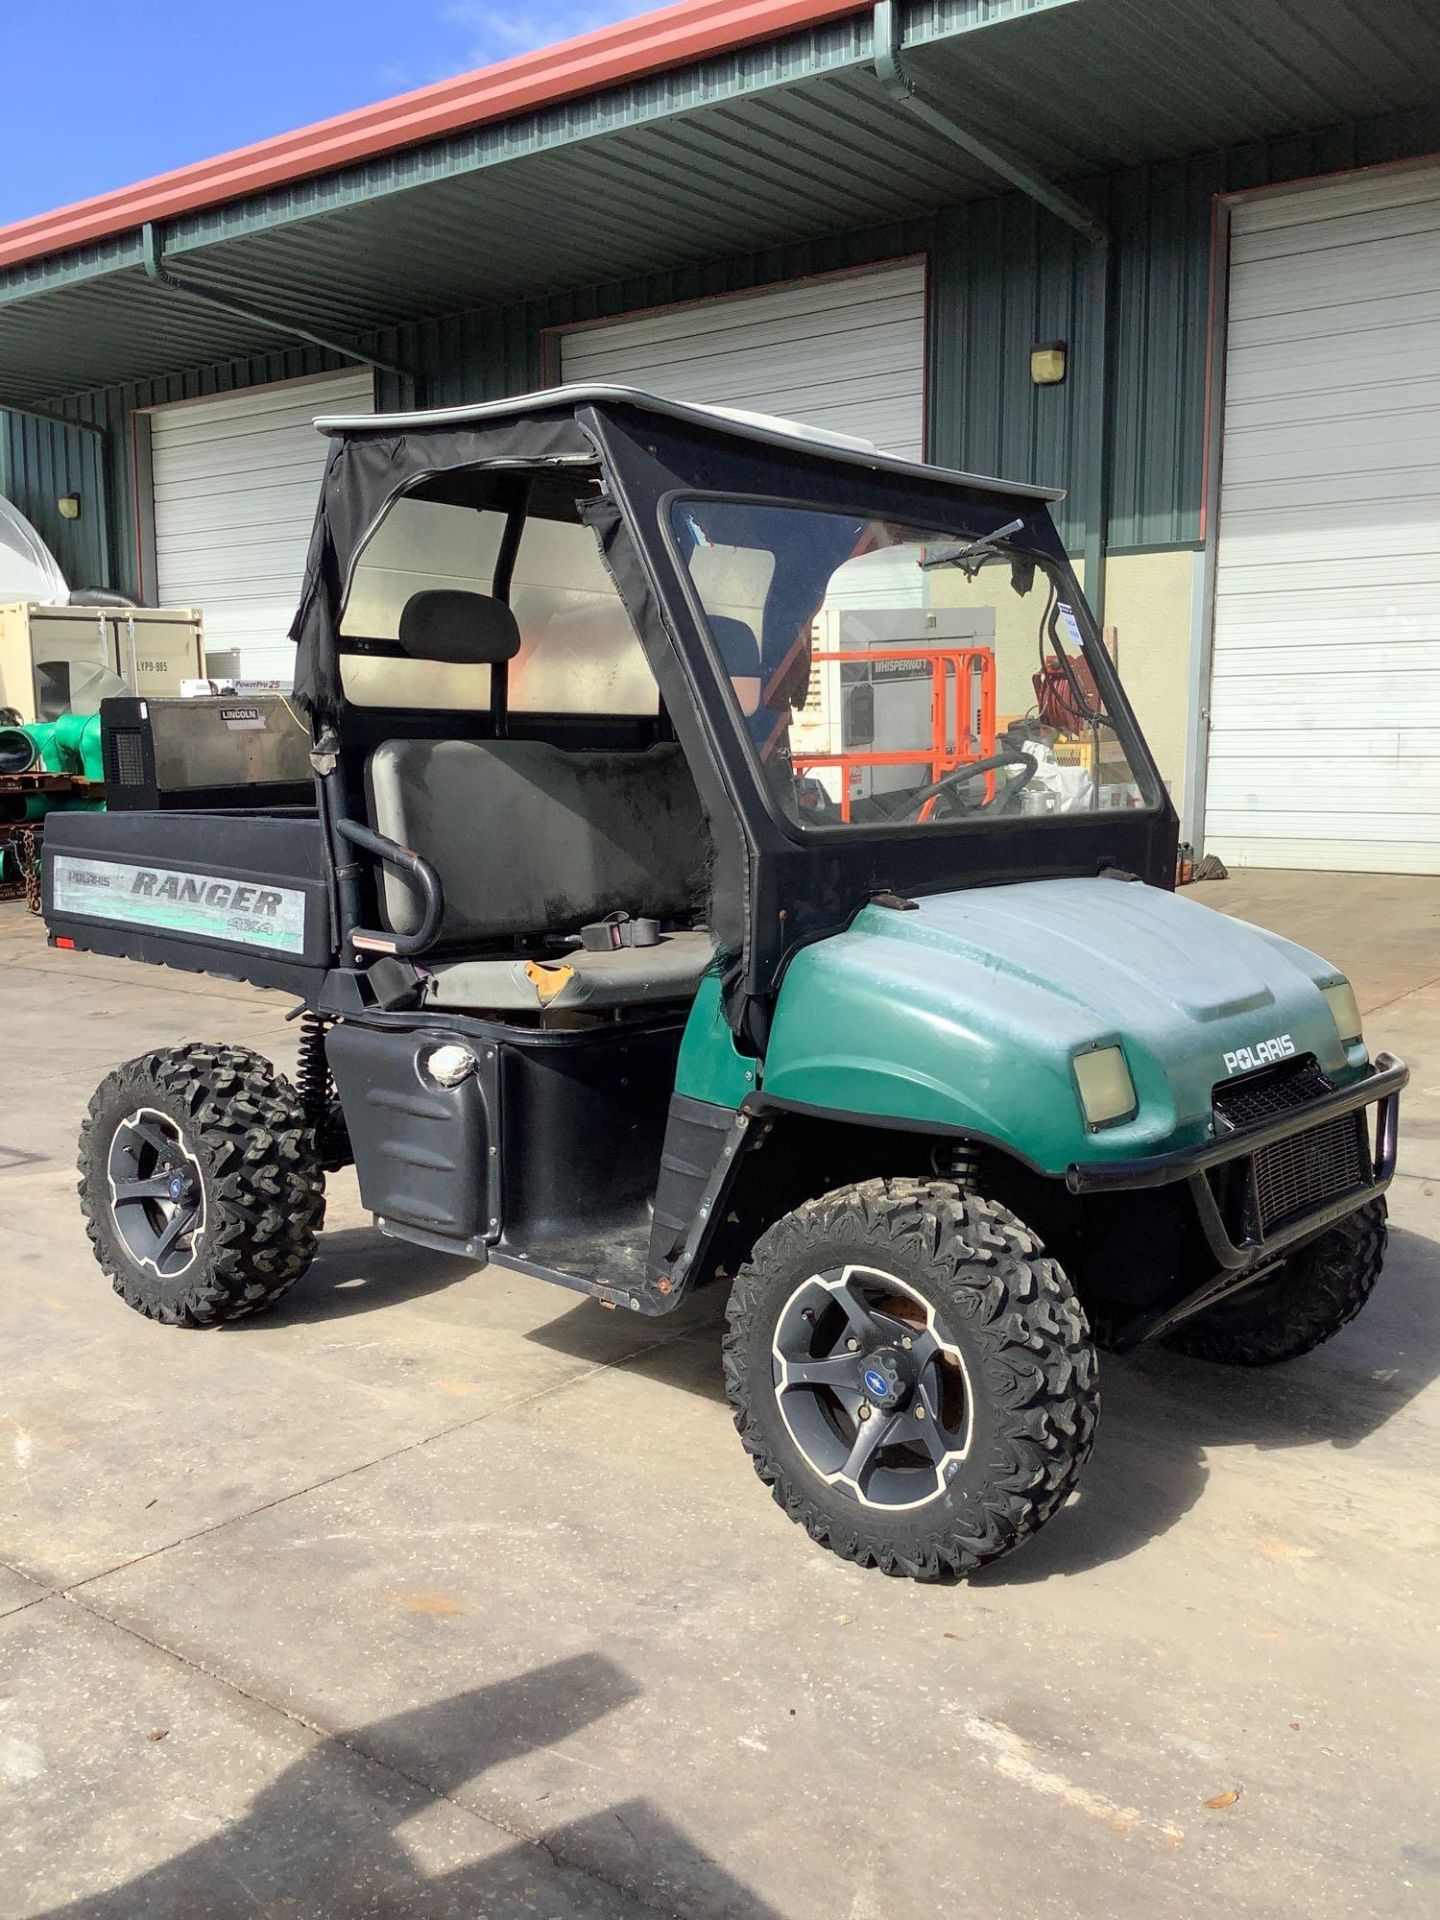 POLARIS RANGER 4x4, GAS POWERED, AWD, HITCH ON BACK, MANUAL DUMP BED, WINDSHIELD WIPER, RUNS AND OPE - Image 8 of 14